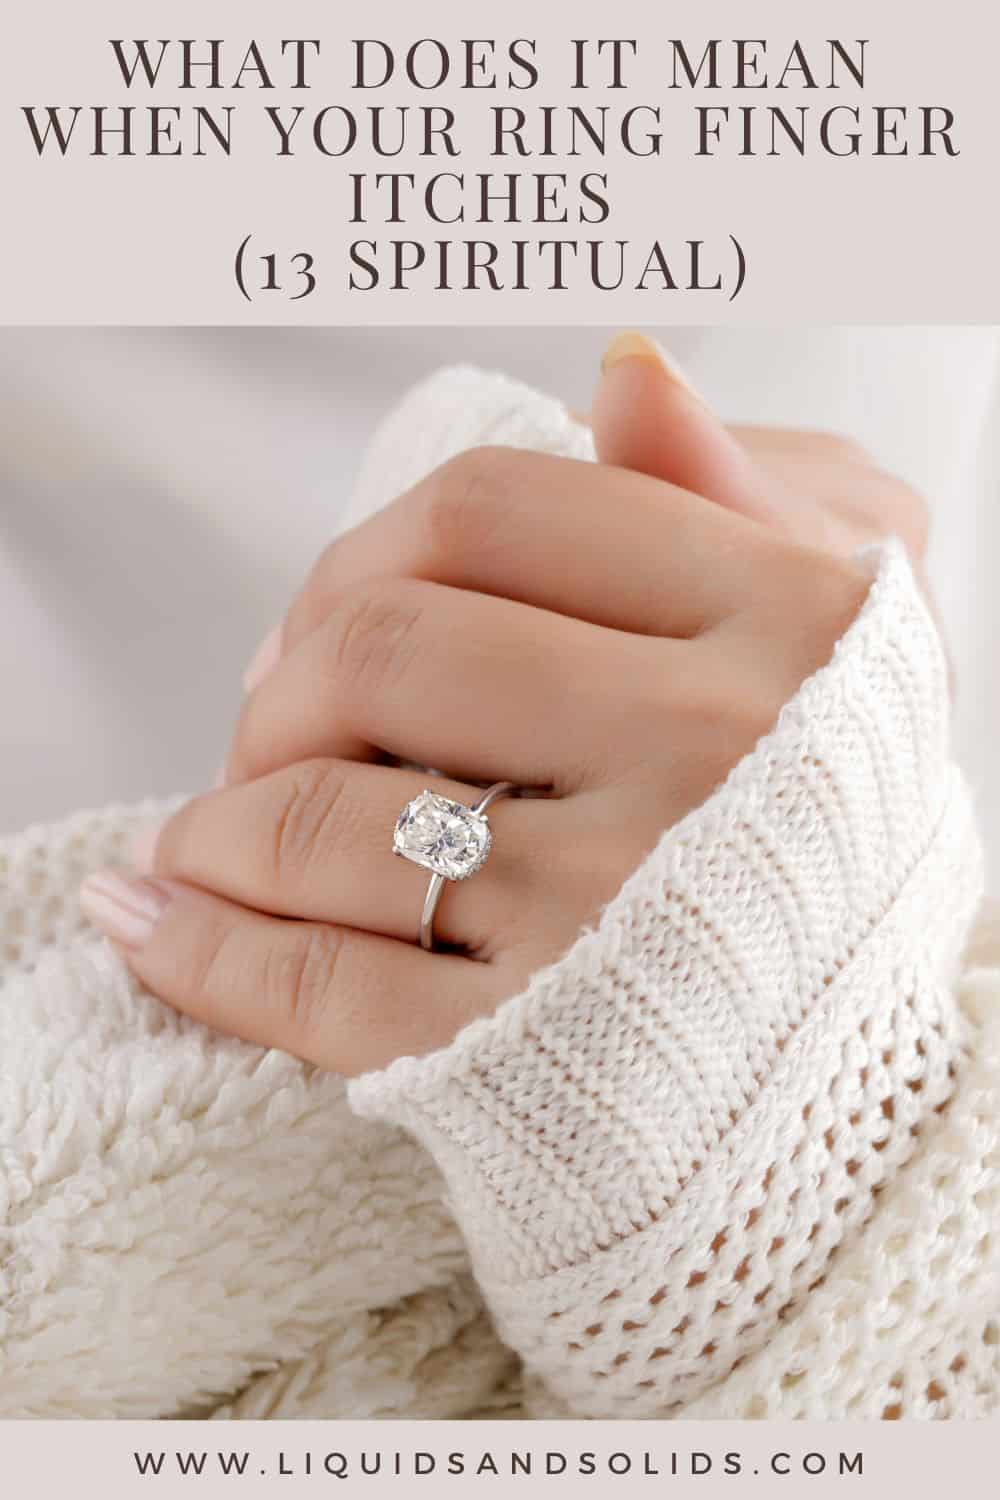 What Does It Mean When Your Ring Finger Itches (13 Spiritual)